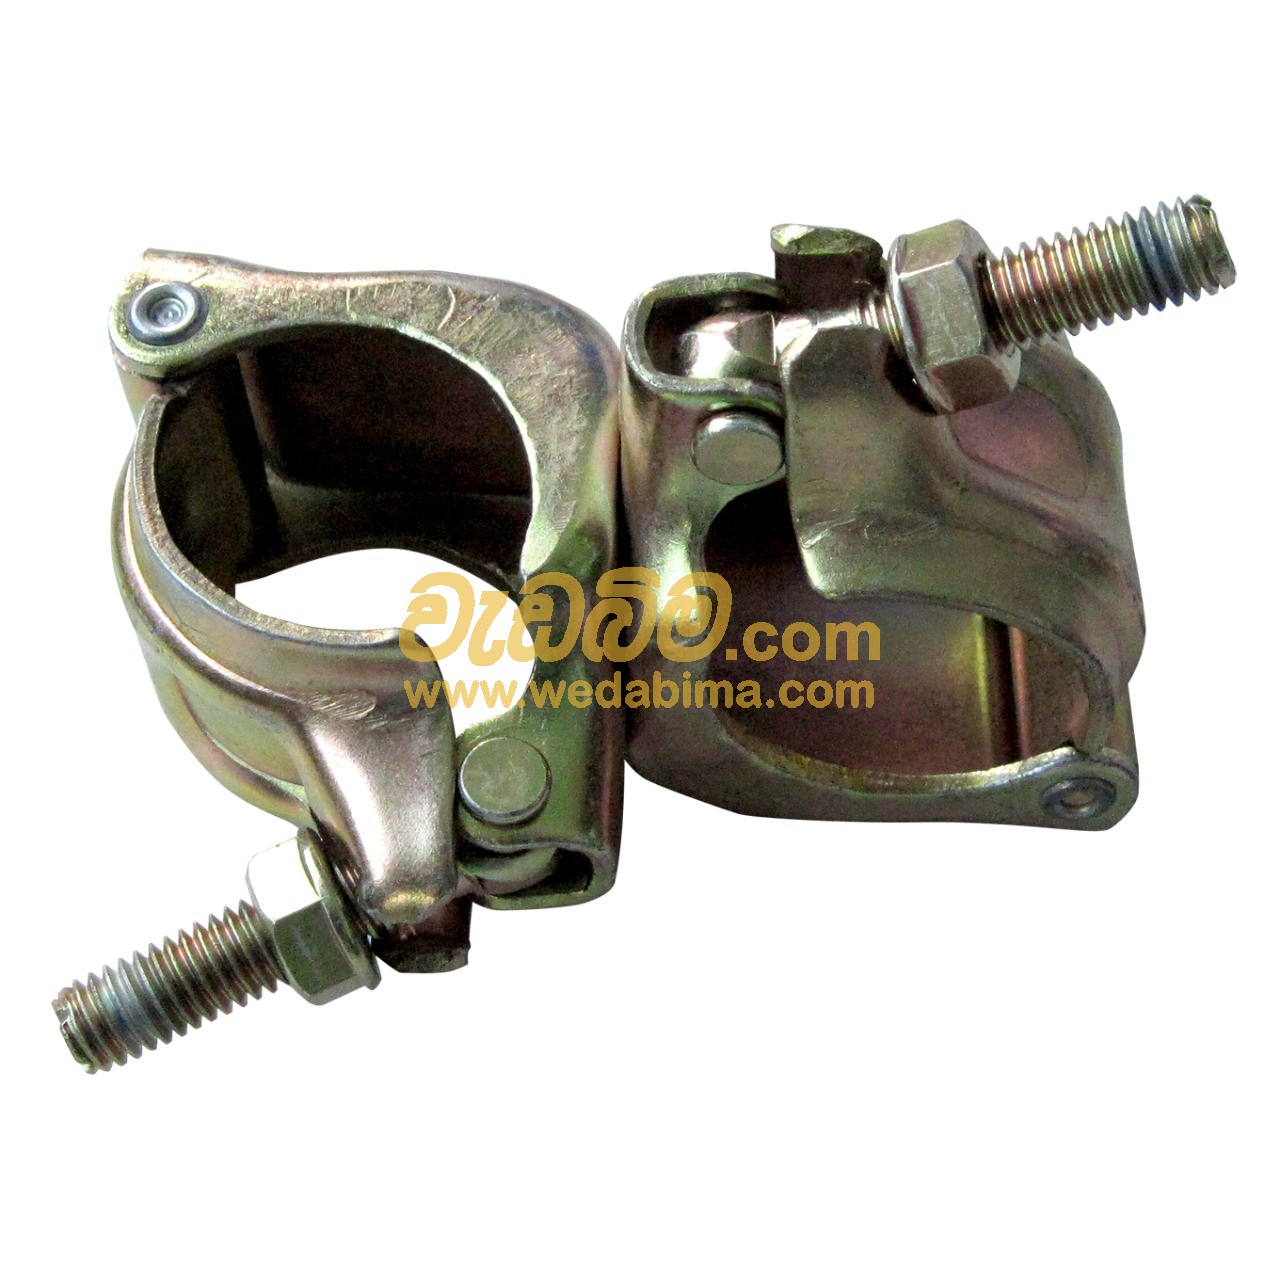 Cover image for Scaffolding Clamps for Sale